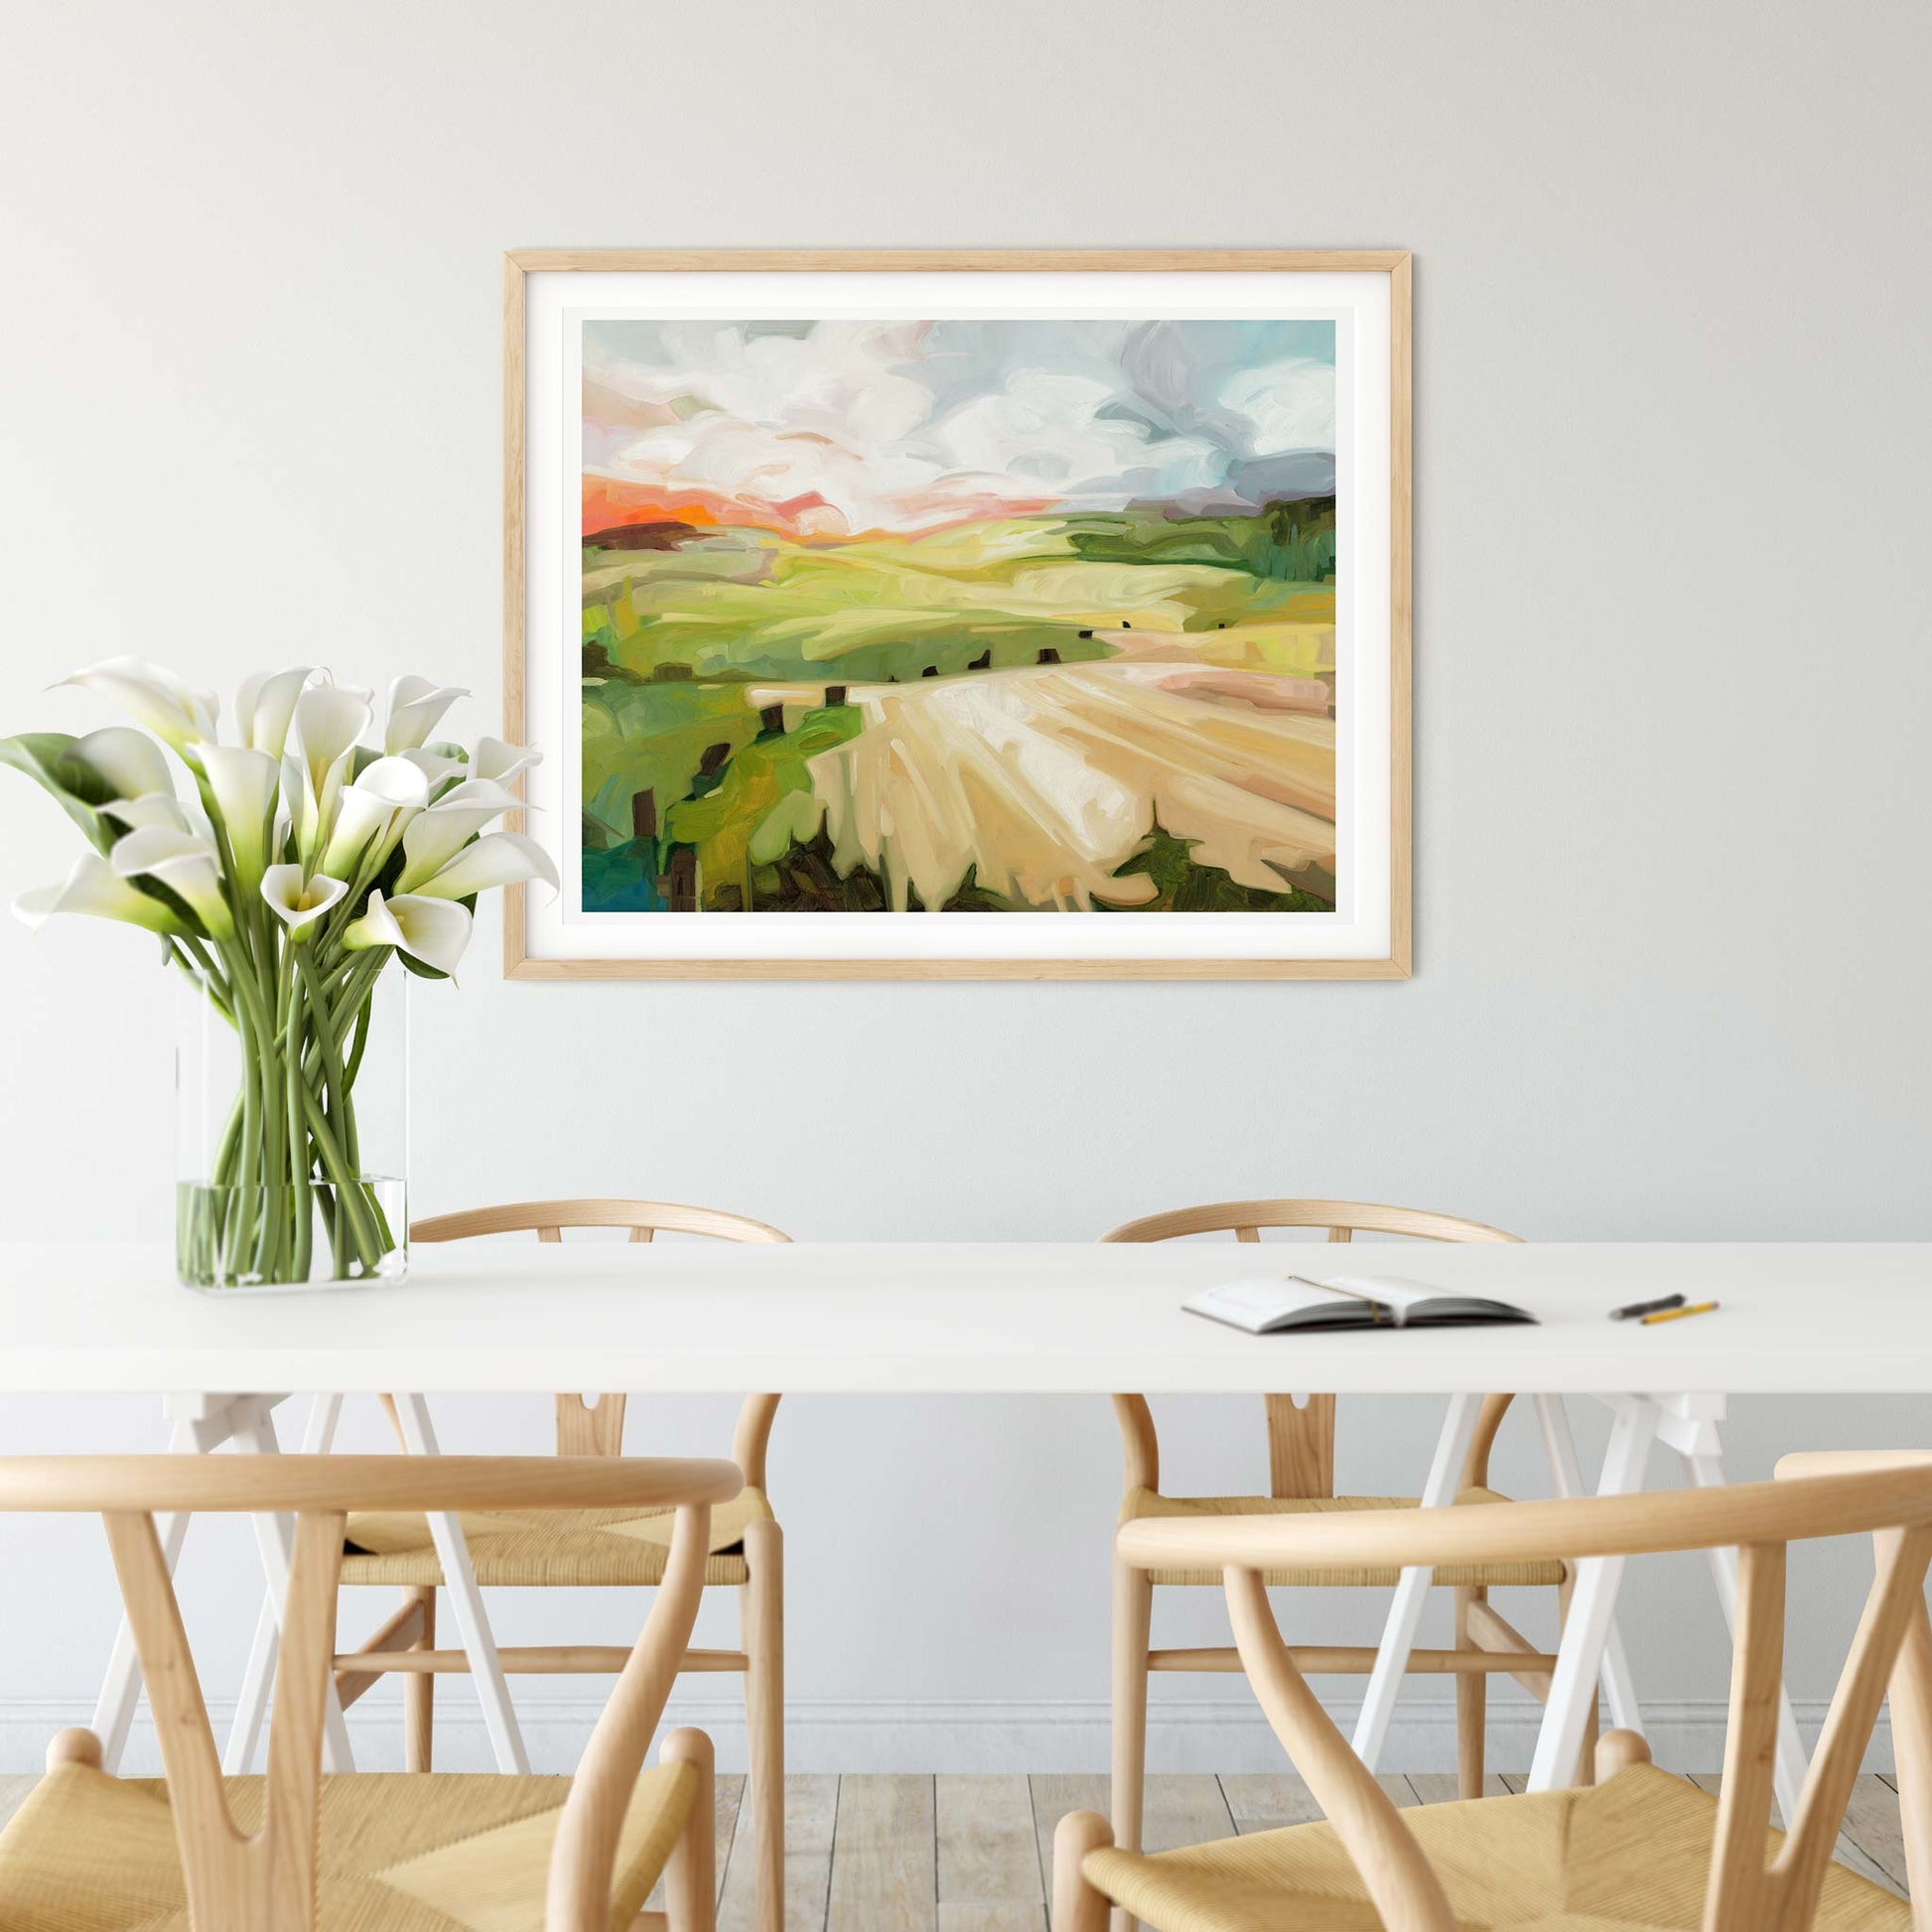 large horizontal art print of an abstract landscape artwork over dining table